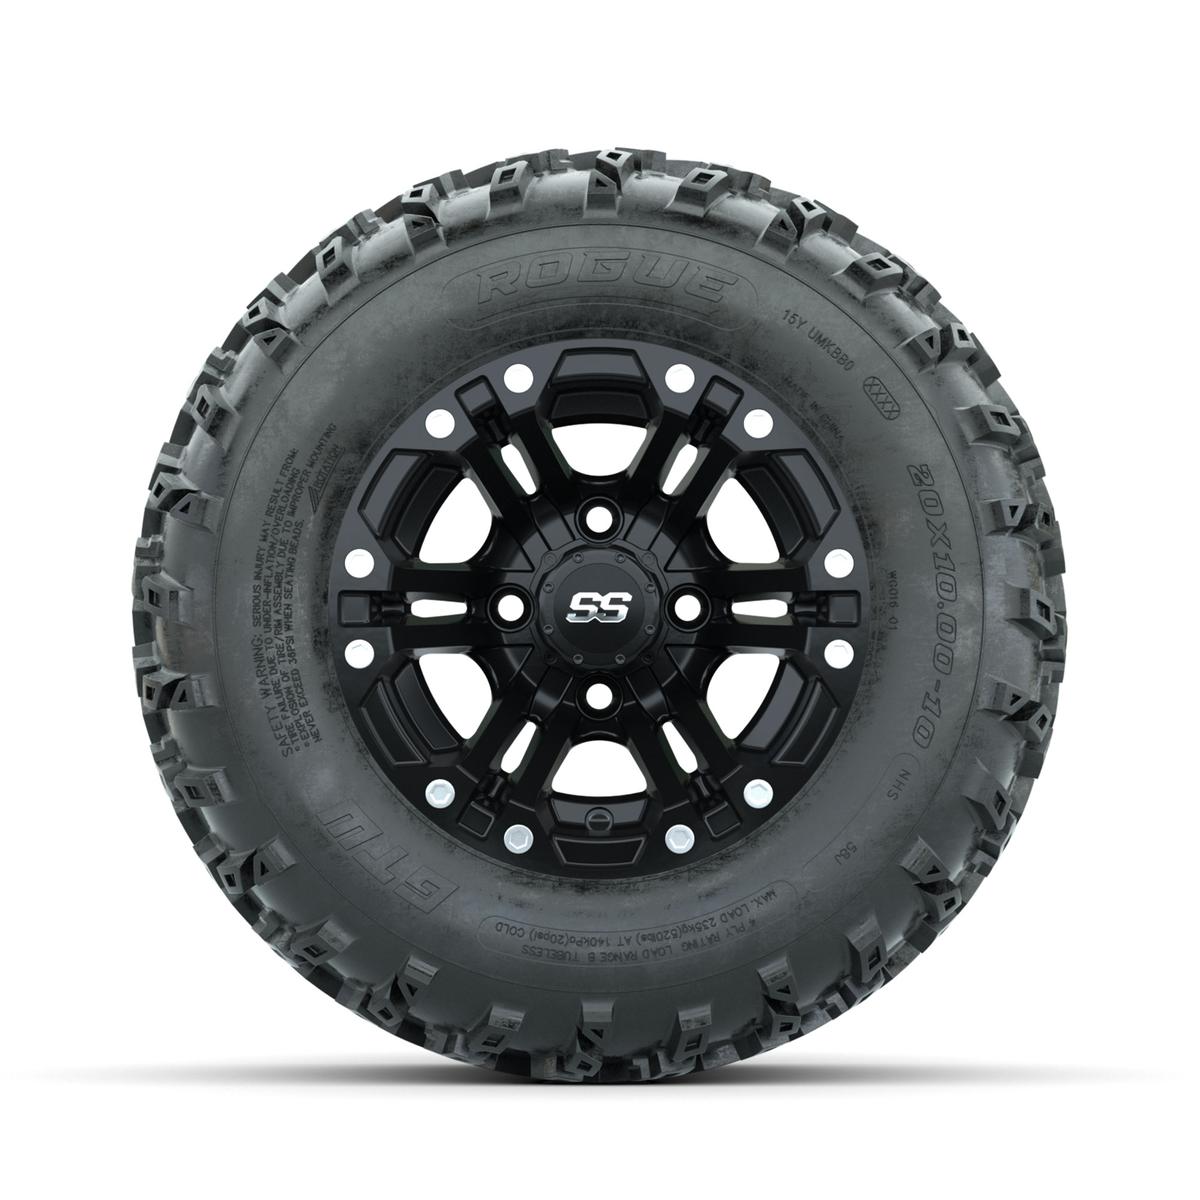 GTW Specter Matte Black 10 in Wheels with 20x10.00-10 Rogue All Terrain Tires – Full Set